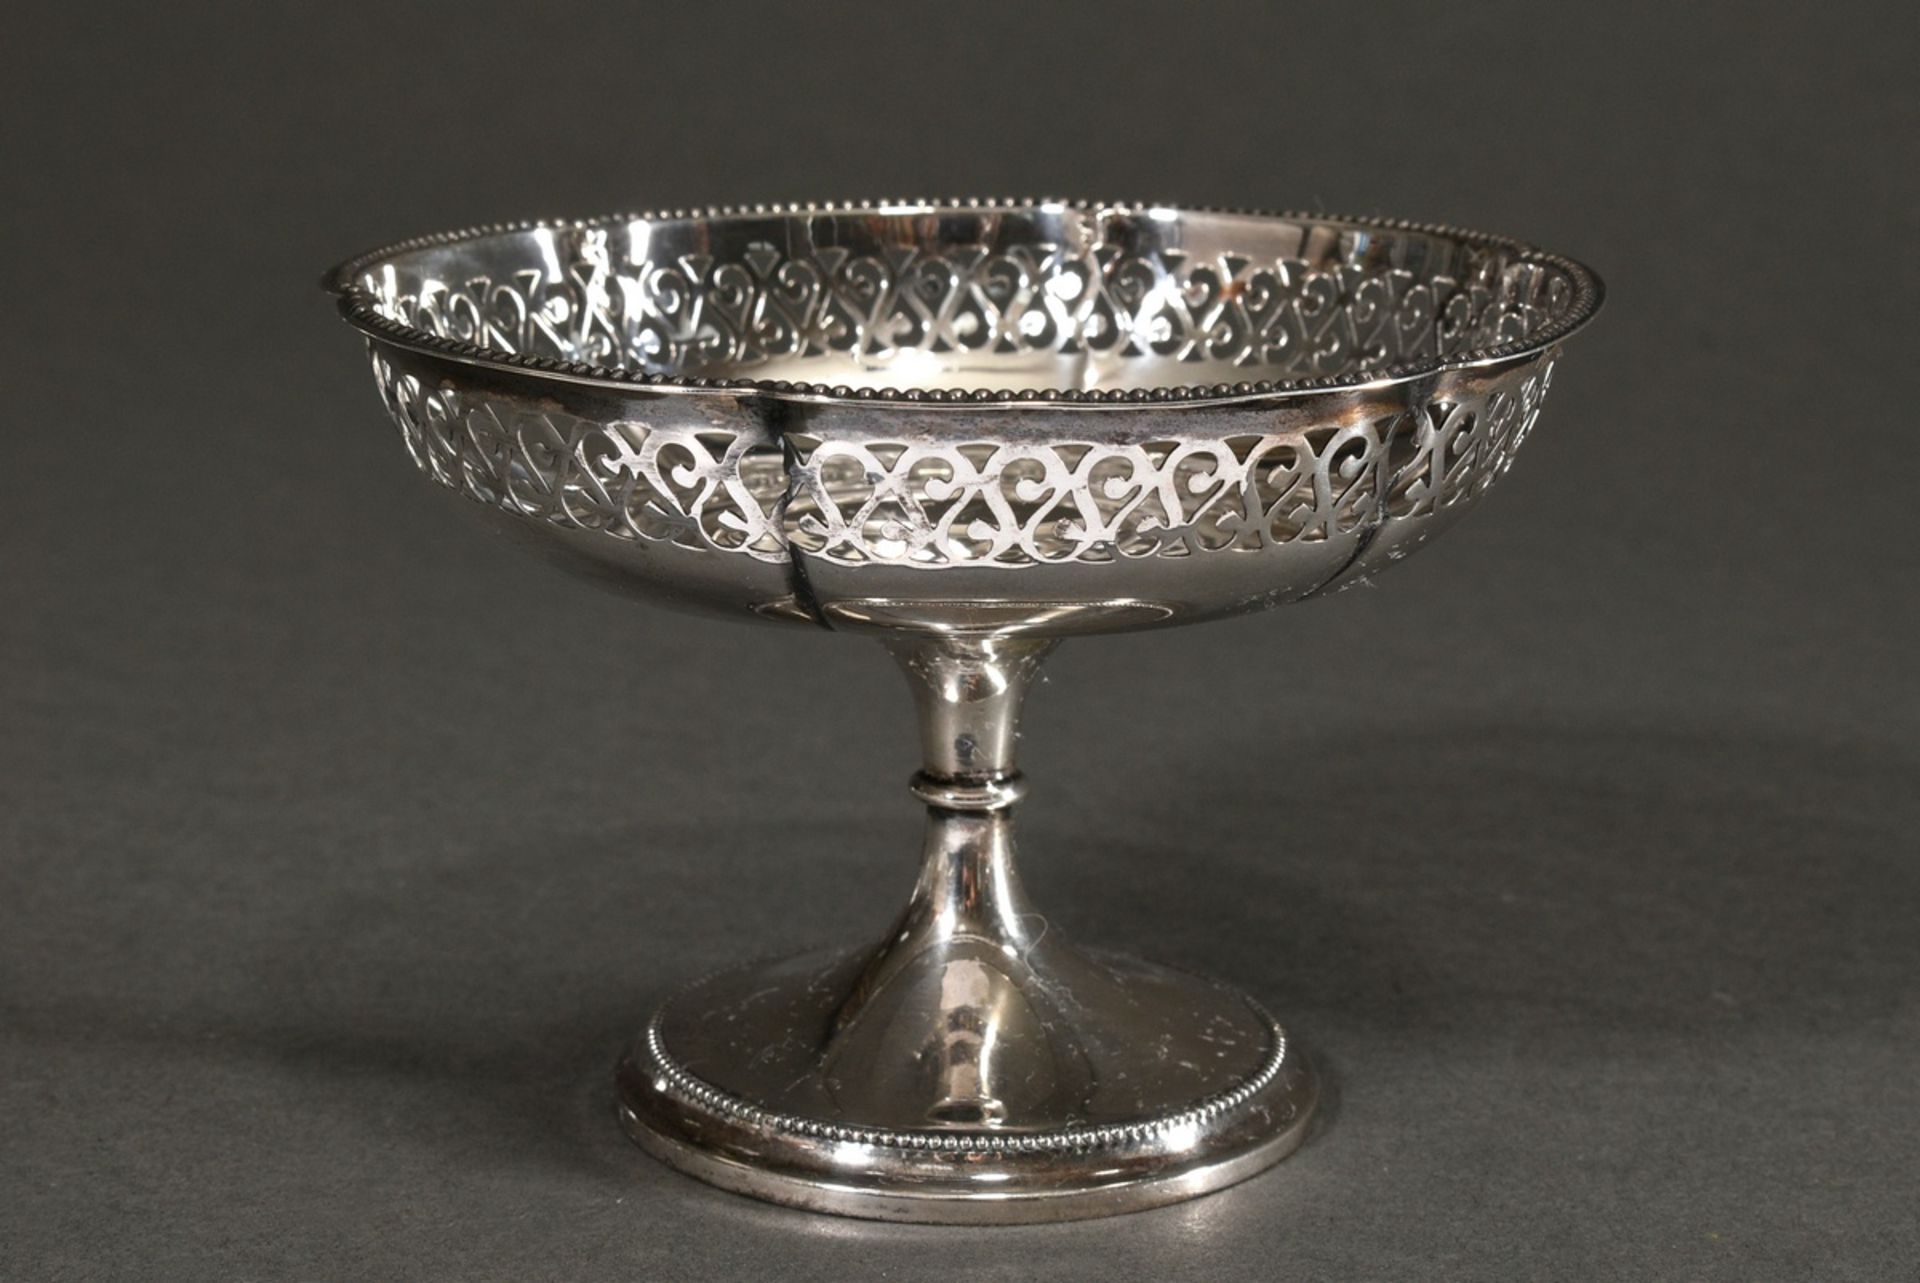 2 Miscellaneous pieces Top and lidded pot with classical grooved decoration and openwork rim, silve - Image 2 of 7